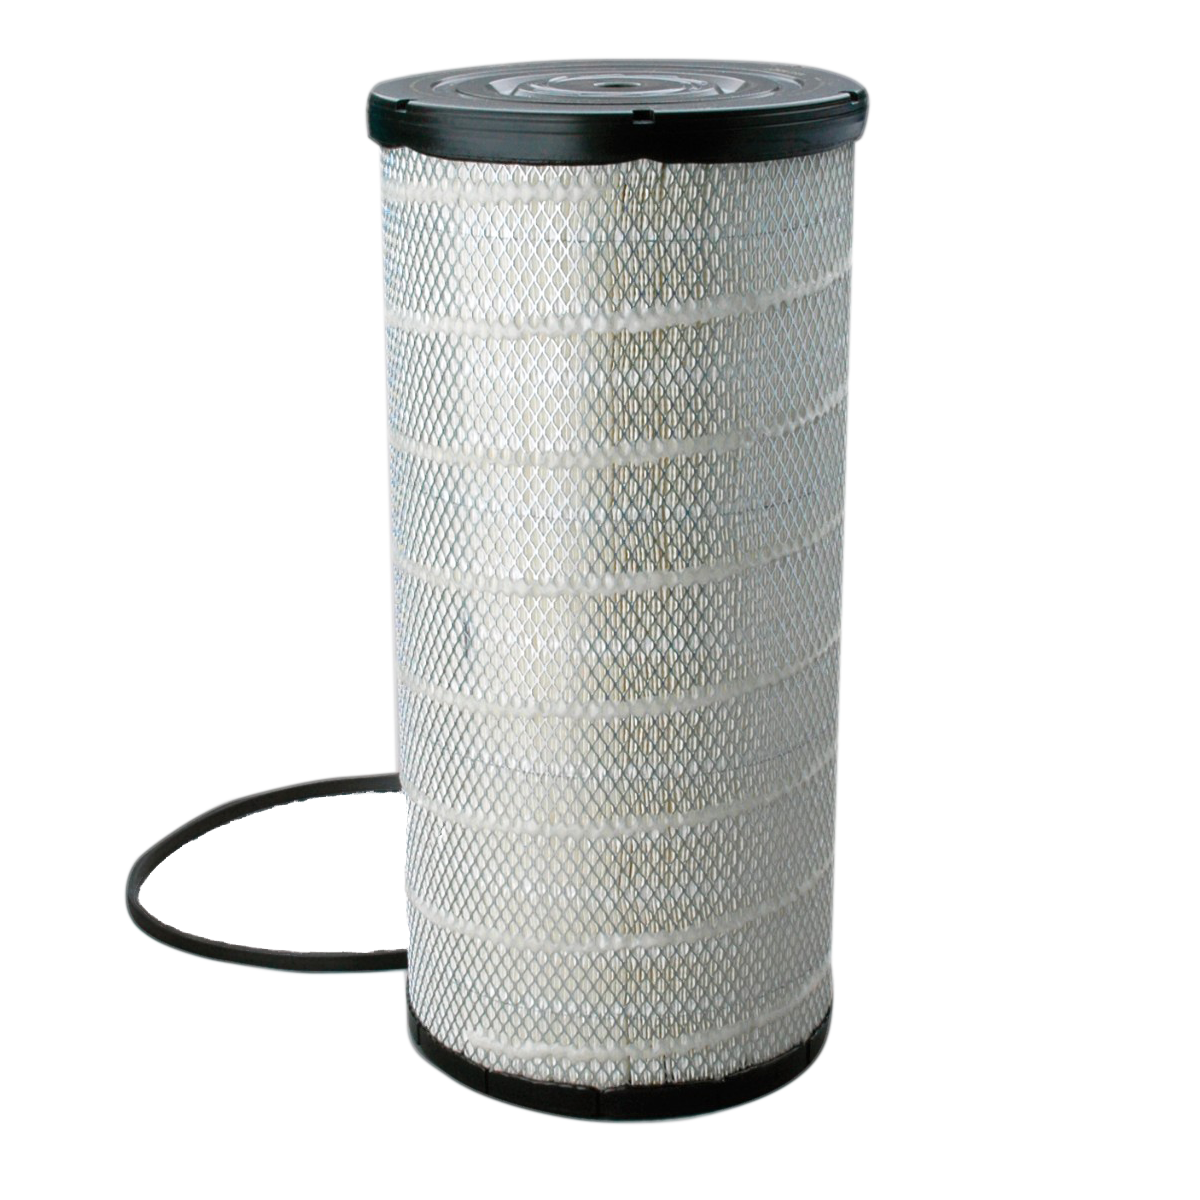 Primary Air Filter RadialSeal P534816WS